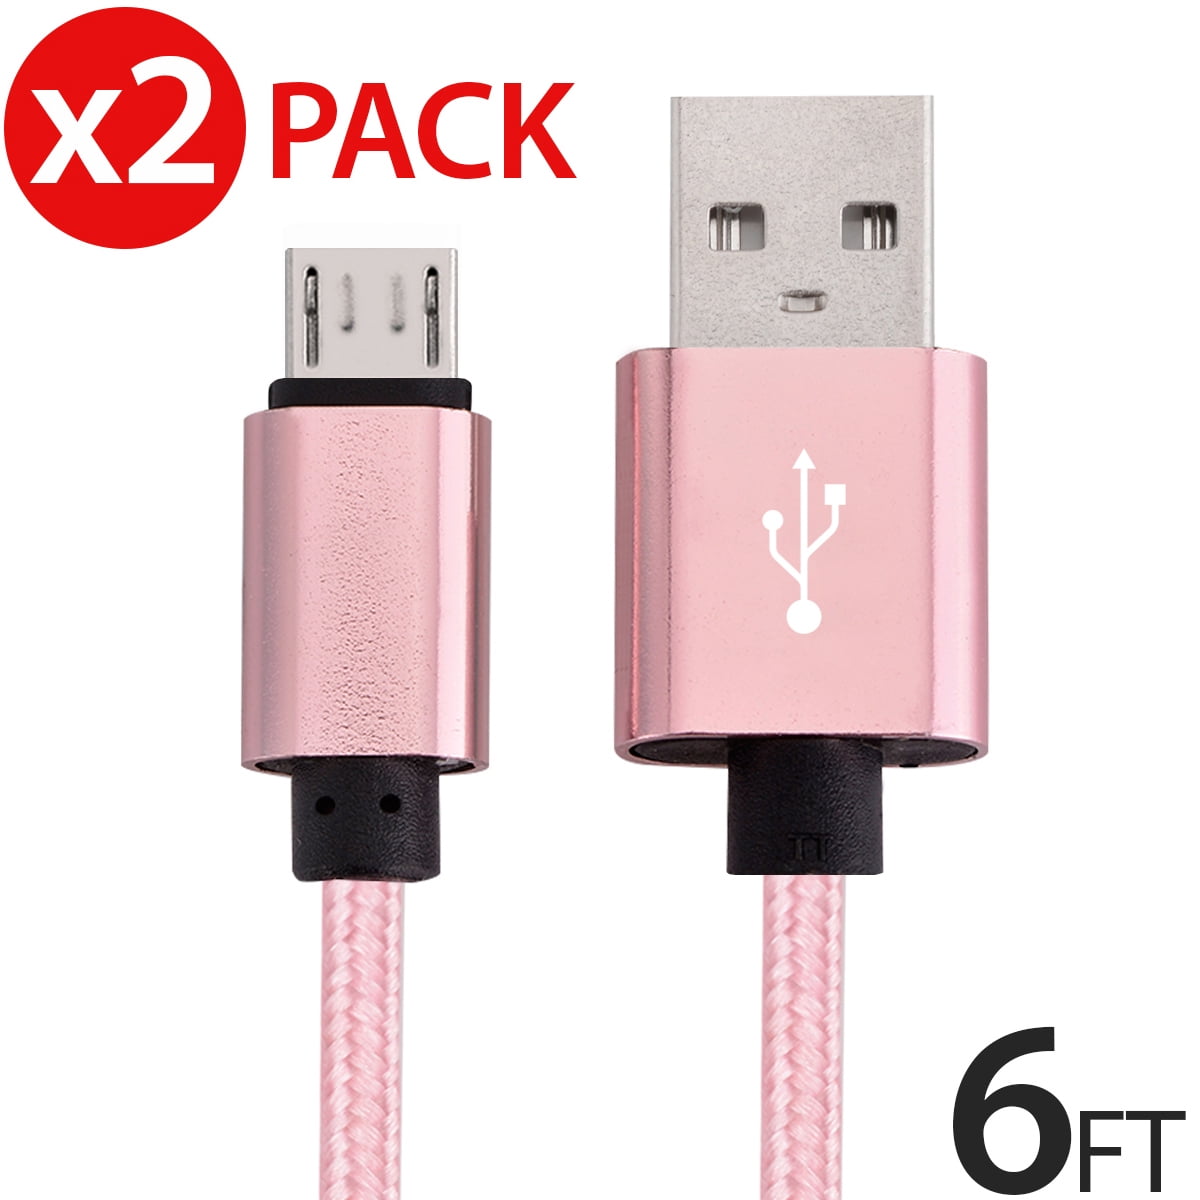 Round USB Data Cable 7 Can Be Charged and Data Transmission Synchronous Fast Charging Cable-Seaside Beach Charging Cable 